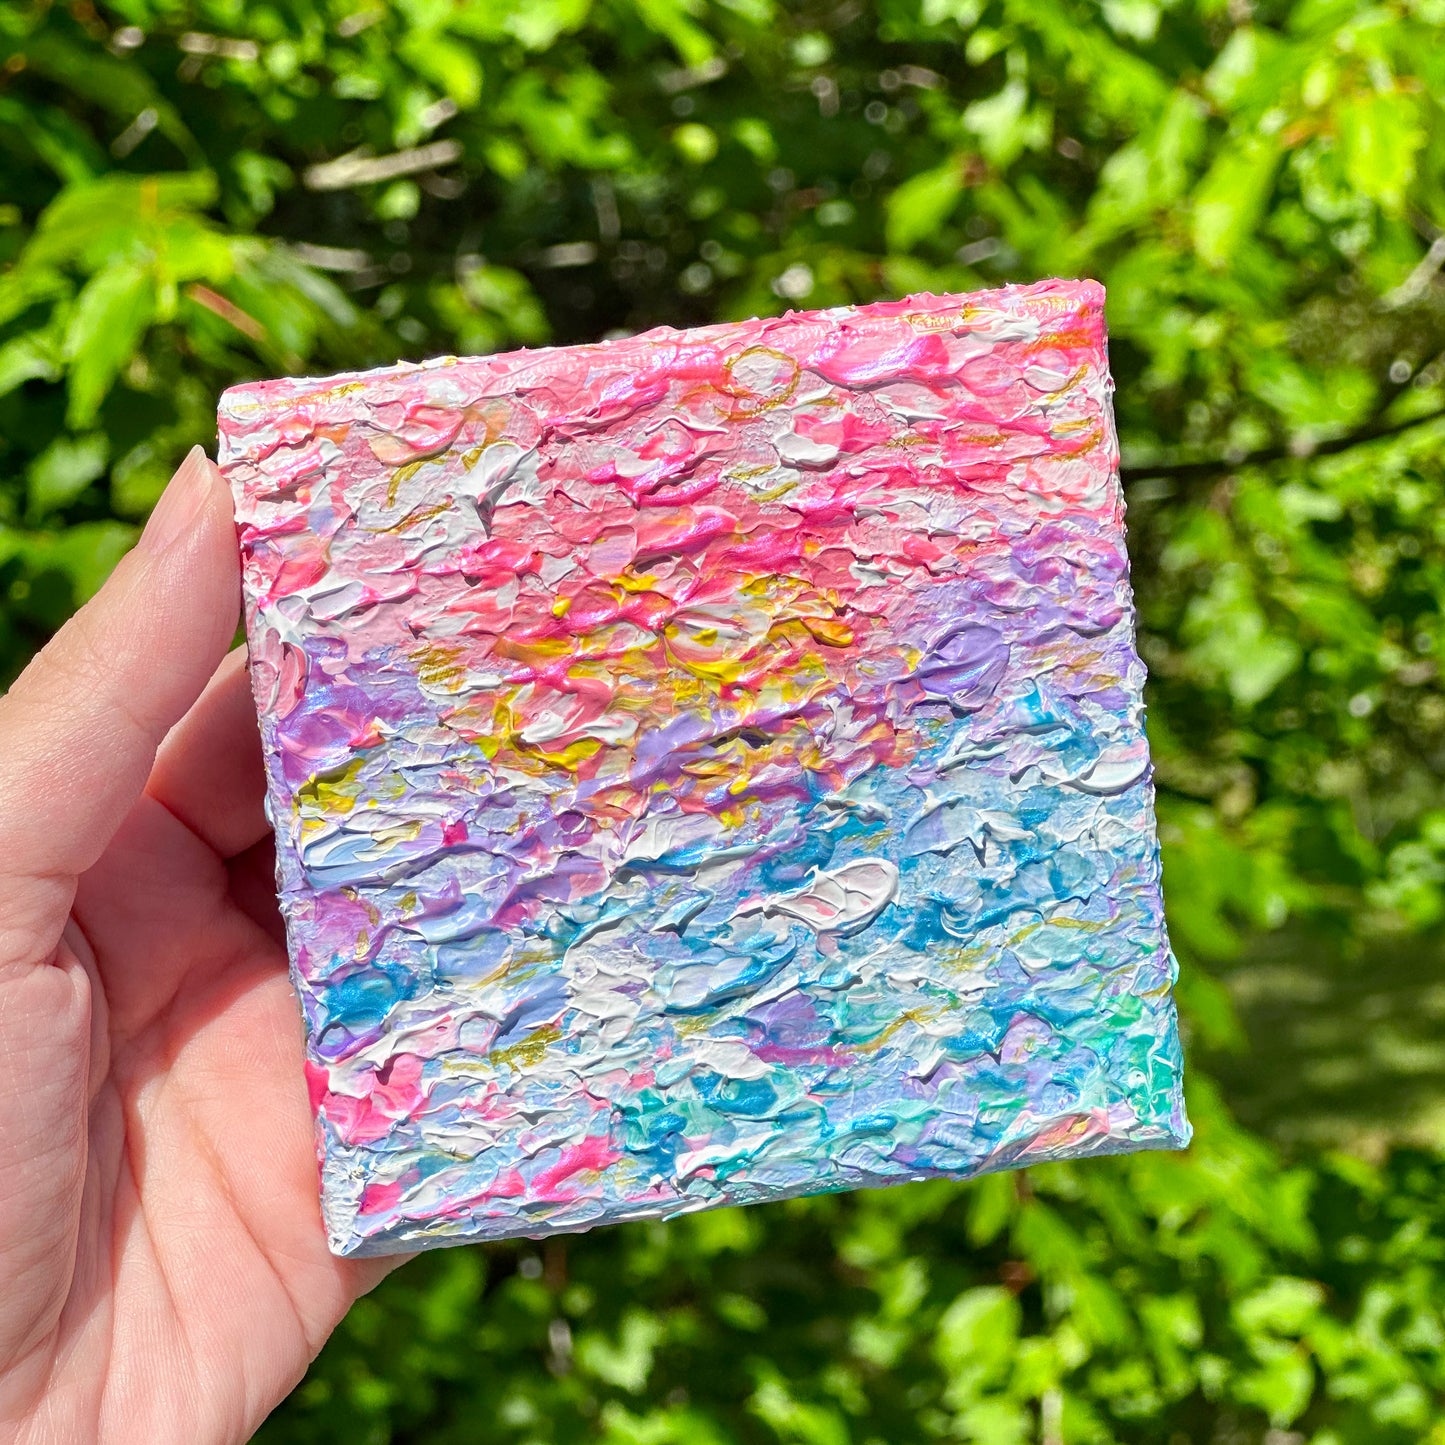 cotton candy skies 2.0 (4x4 canvas)